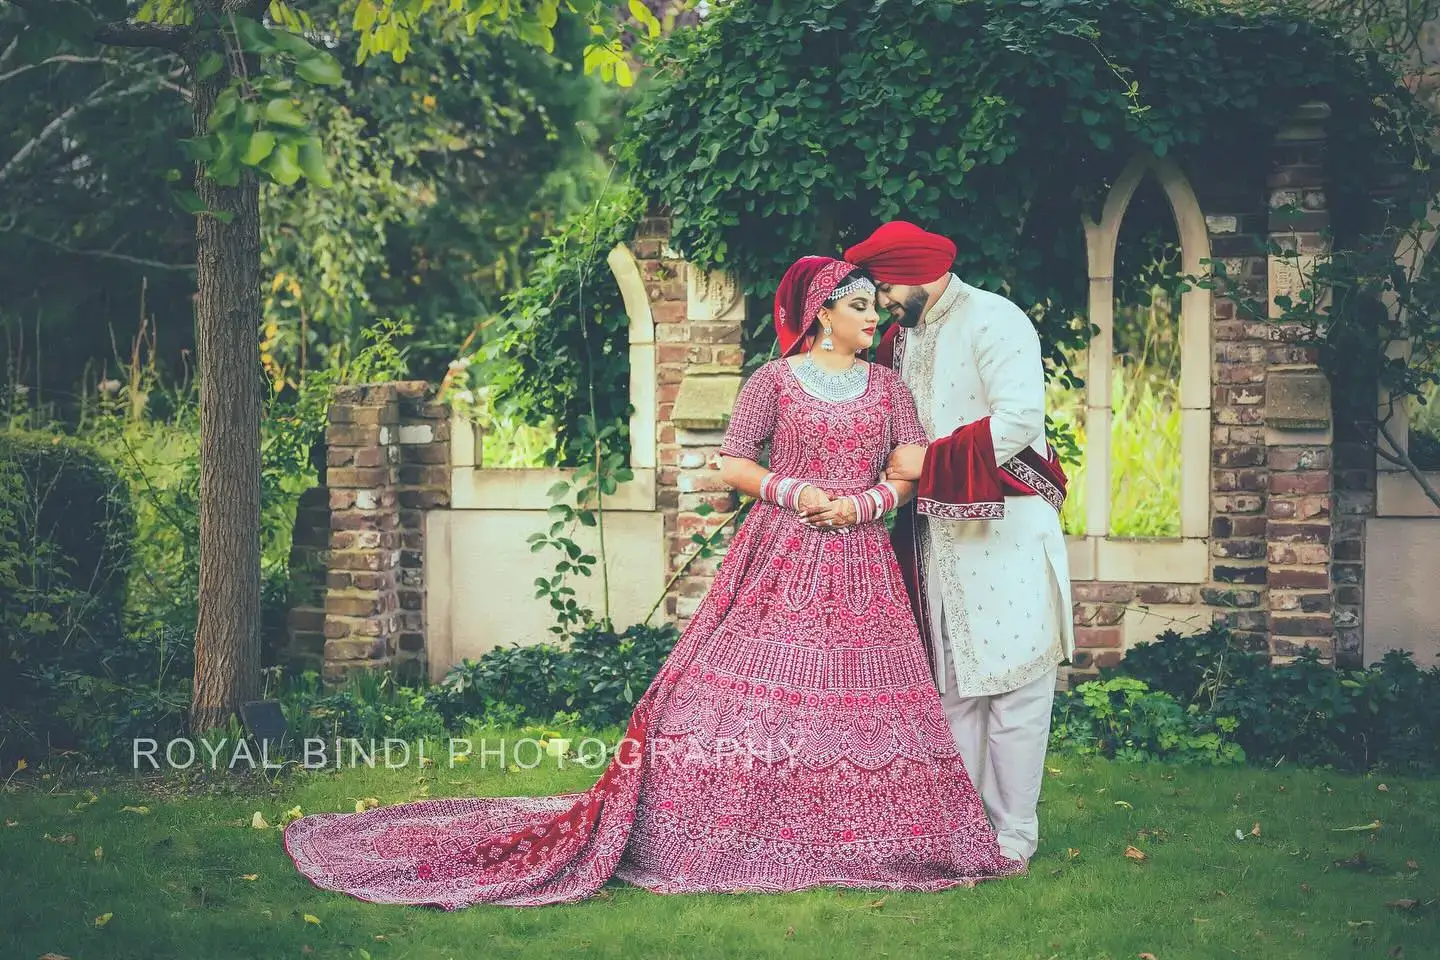 Asian Wedding Photography and Videography Services in Leicester